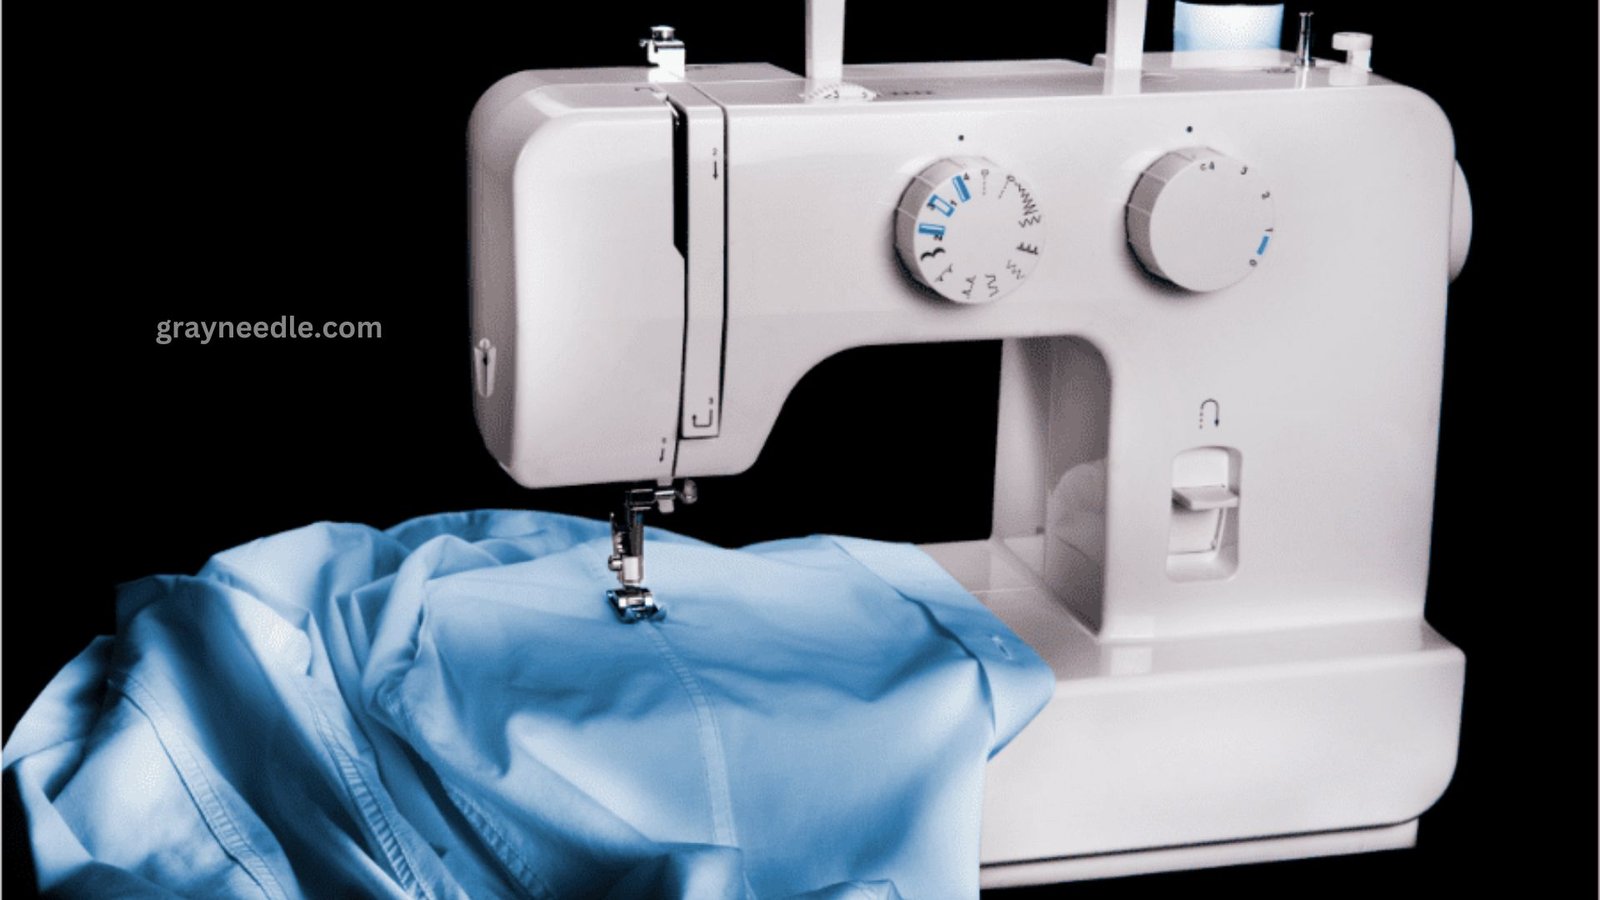 Will a US Sewing Machine Work in the UK?